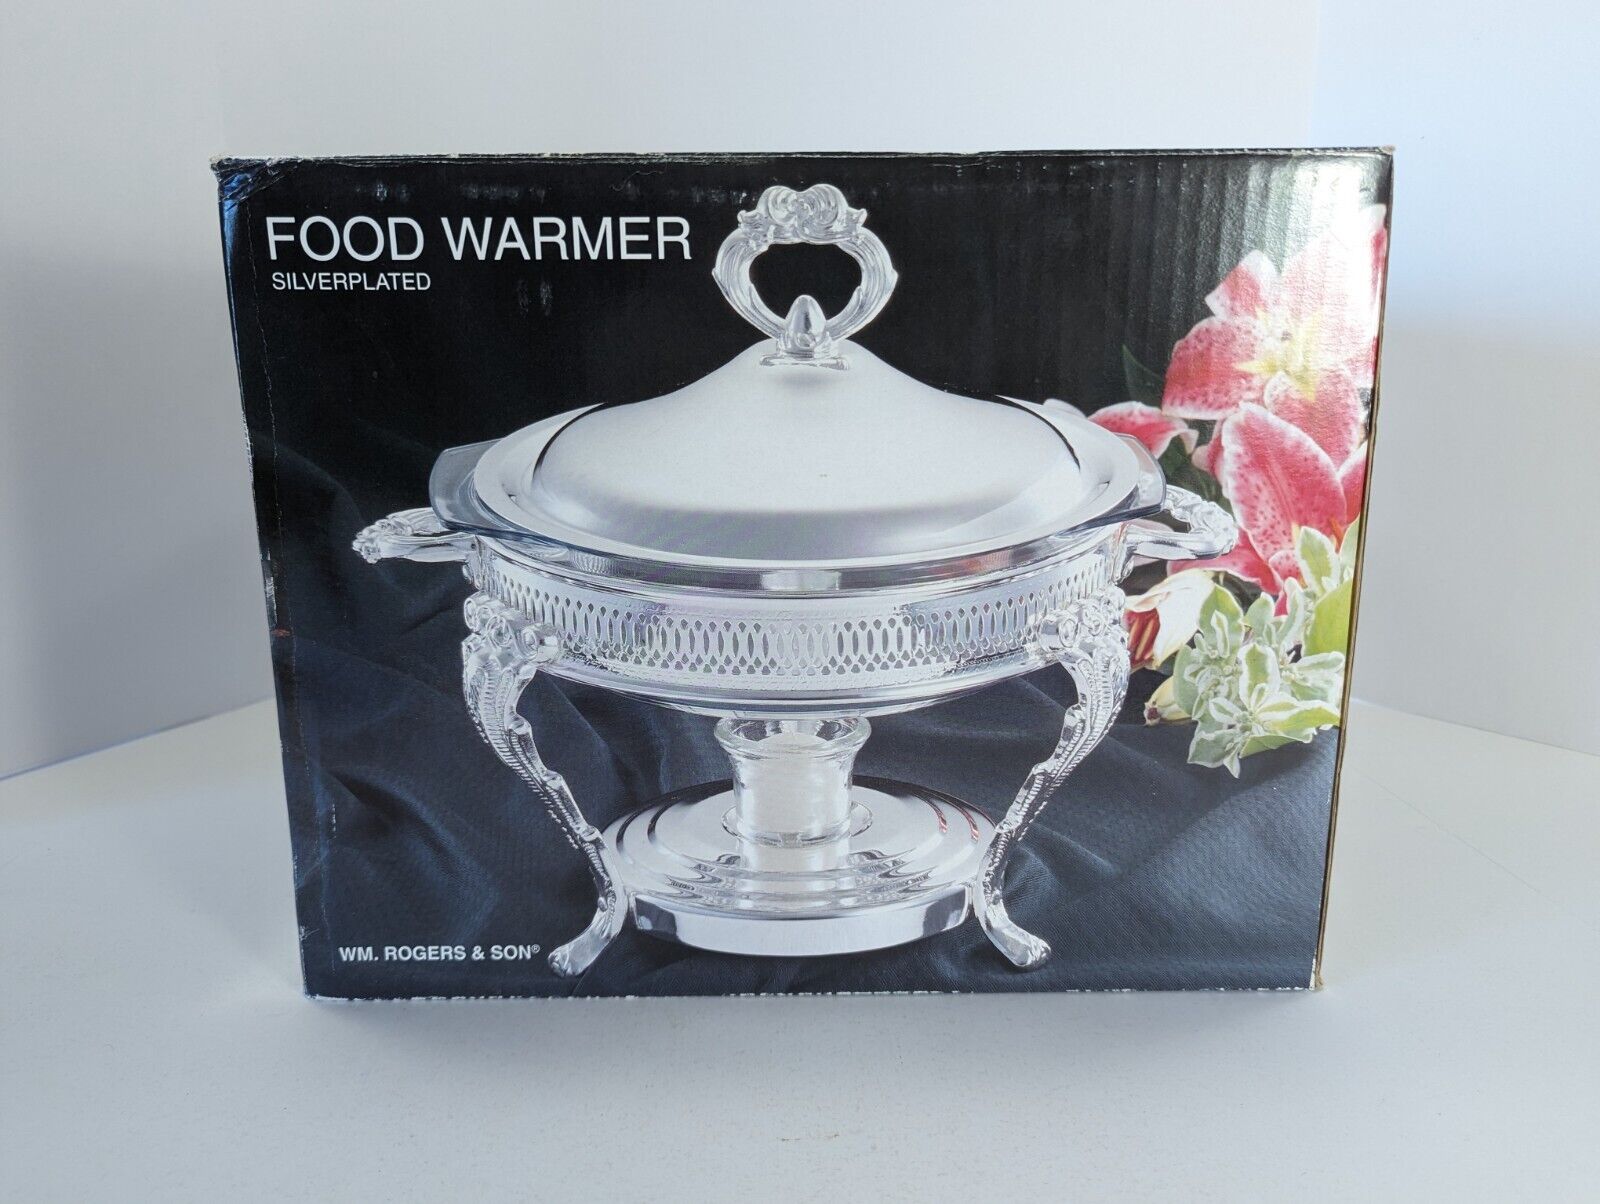 WM. ROGERS AND SON SILVERPLATED FOOD WARMER WITH REMOVABLE 2 QUART Pyrex Bowl